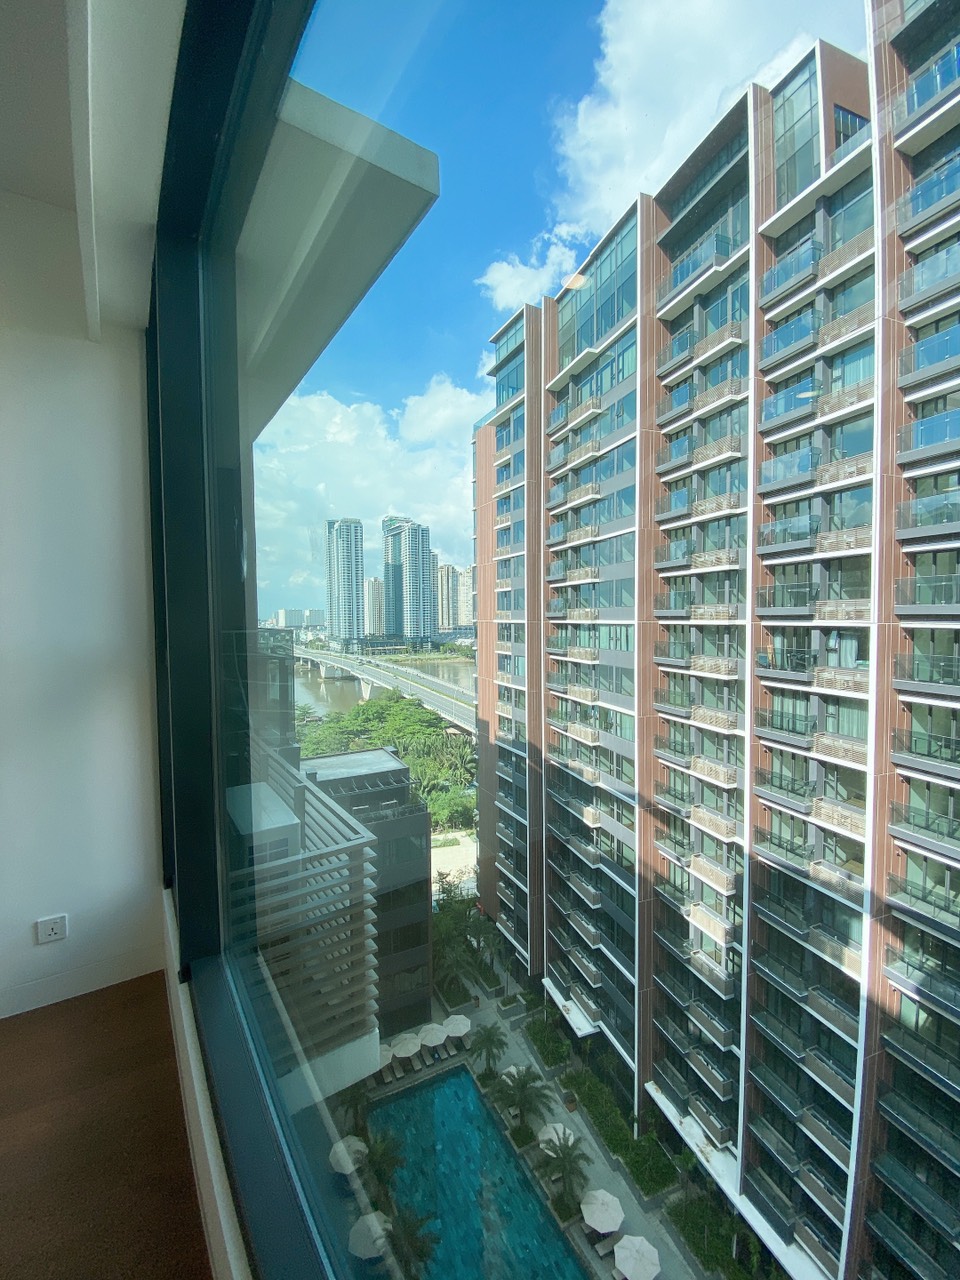 The River for rent 2 bedroom apartment on high floor with open view